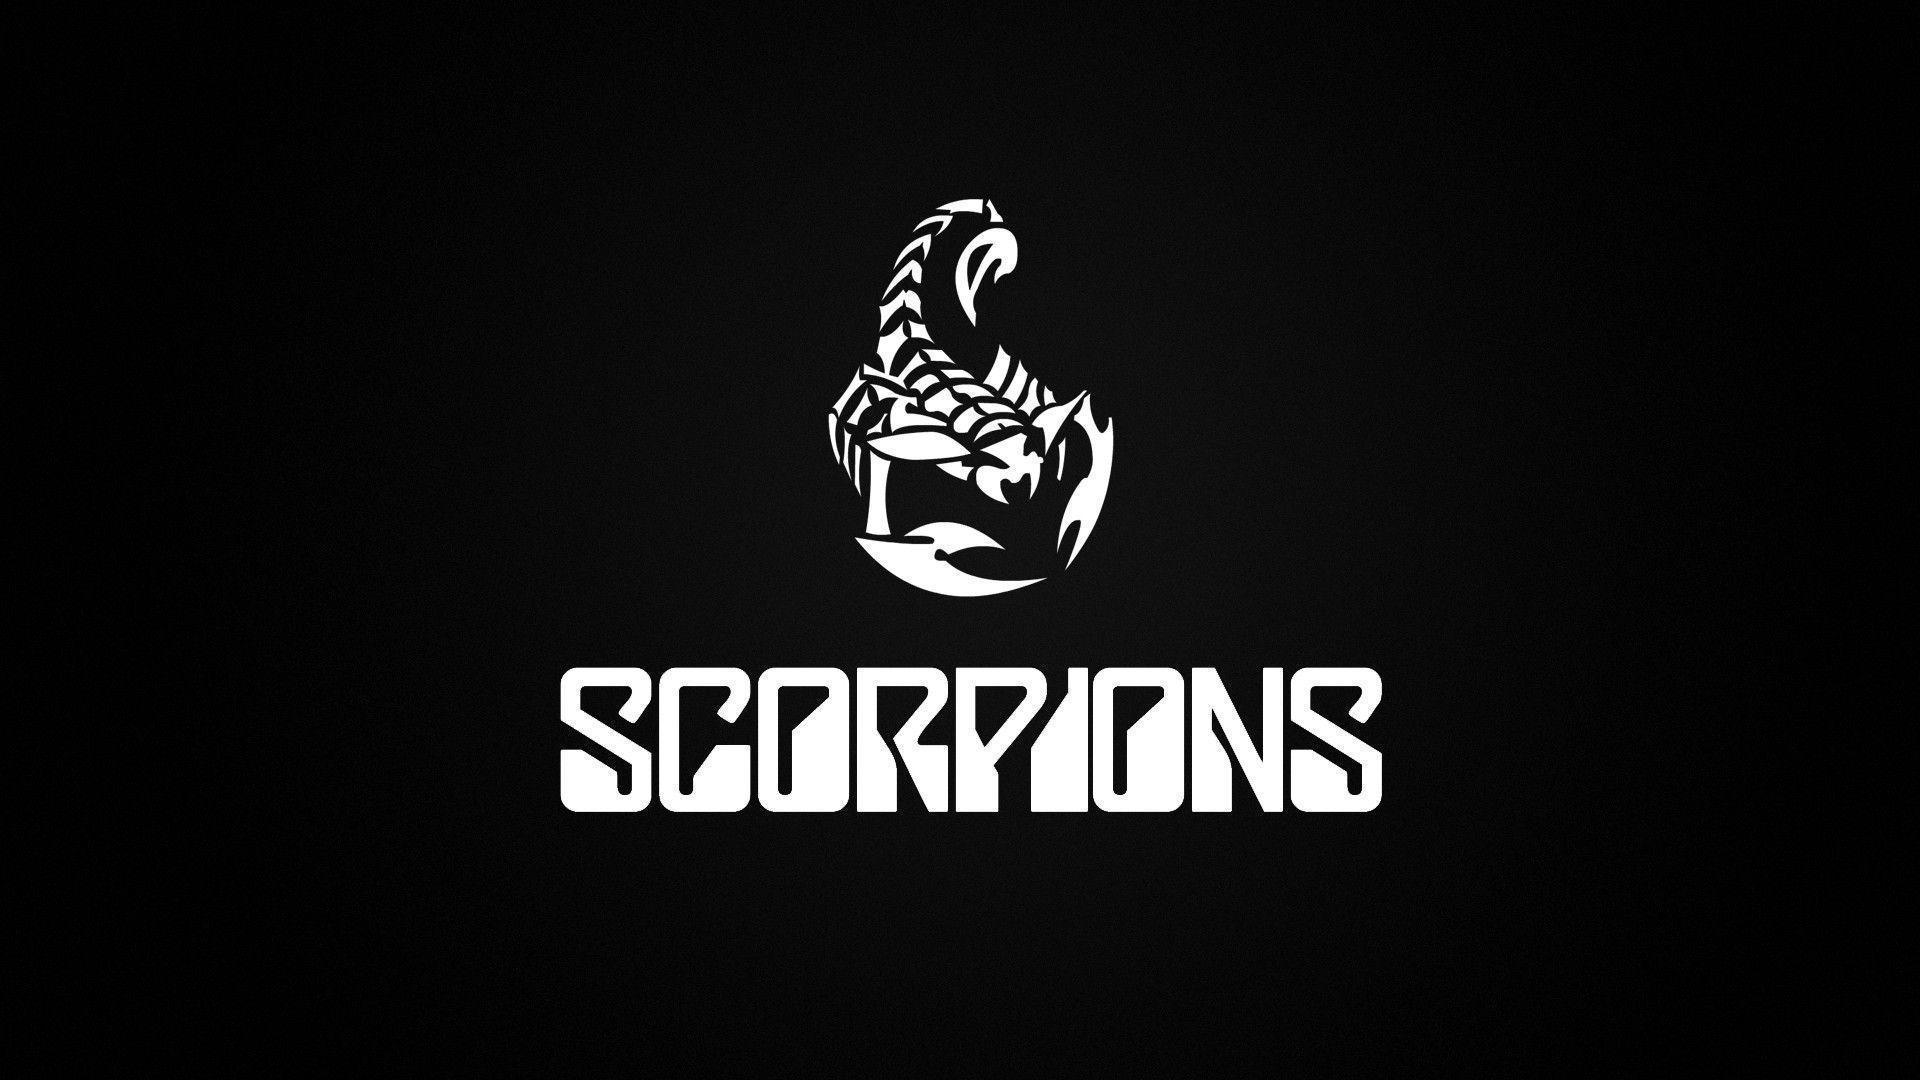 Scorpions Wallpaper And Background Image